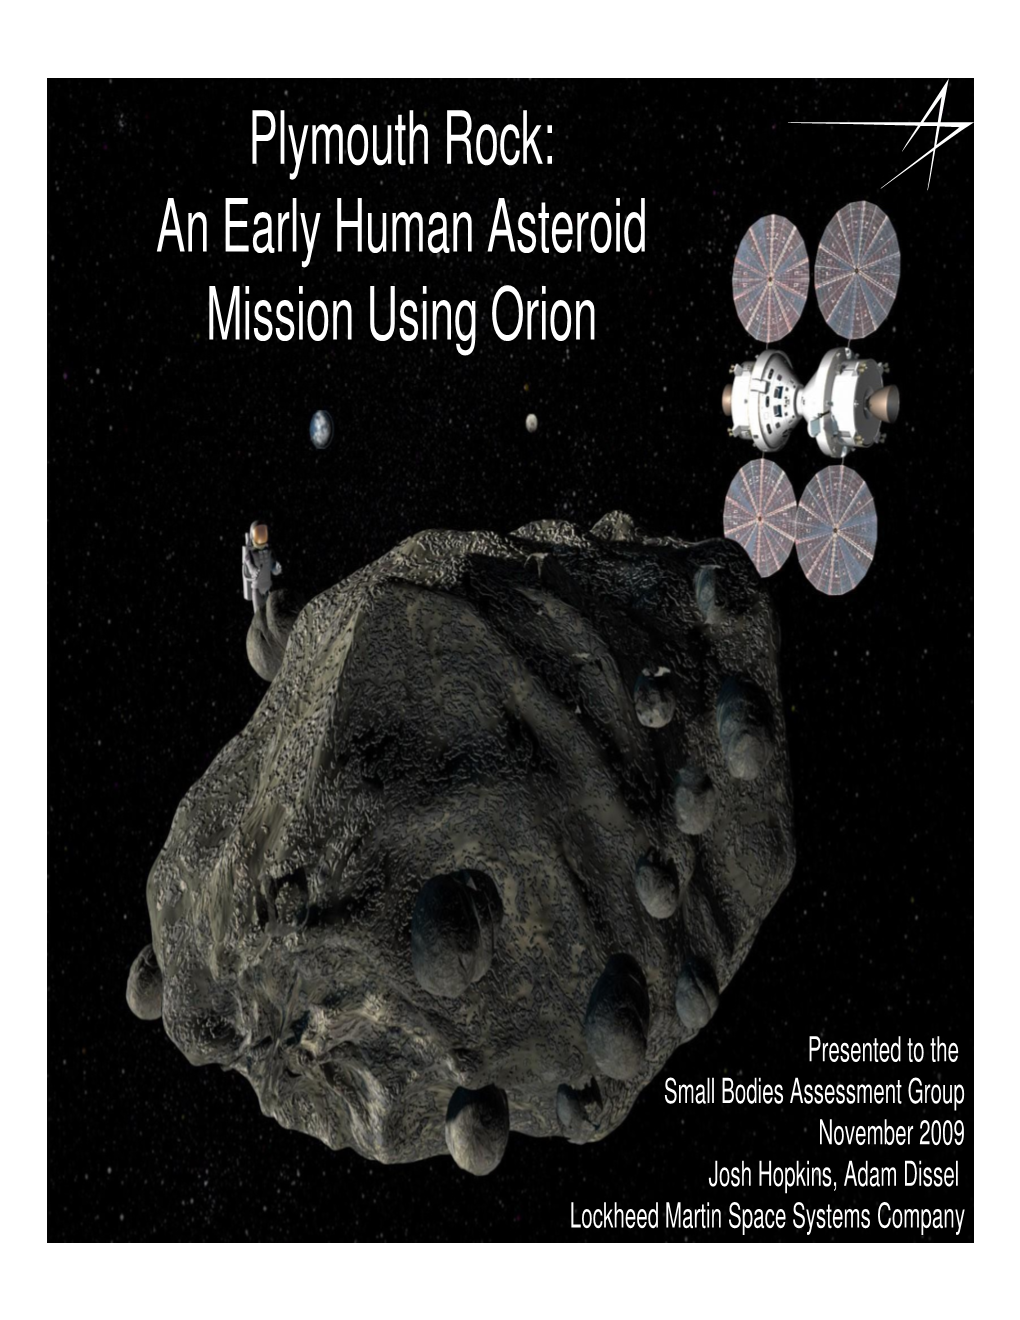 Plymouth Rock: an Early Human Asteroid Mission Using Orion